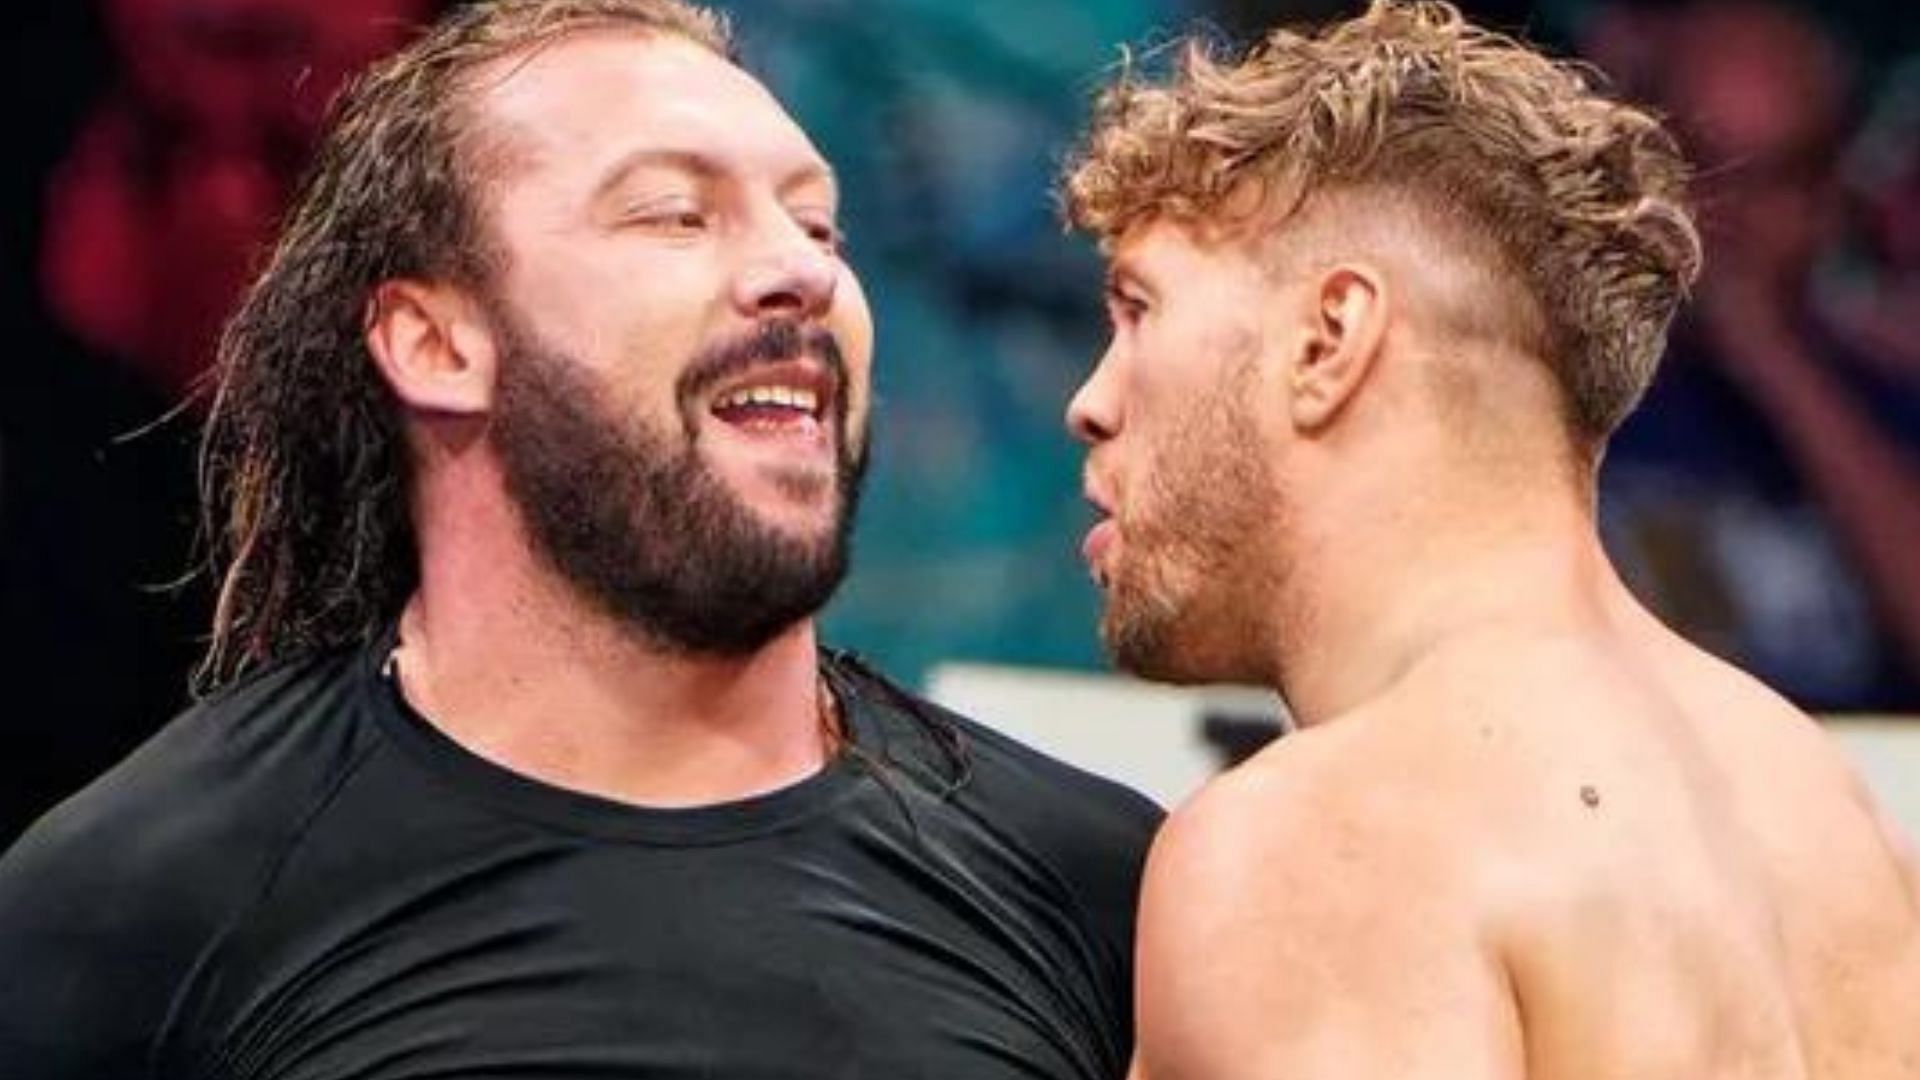 Another wrestling veteran has a problem with Kenny Omega and Will Ospreay